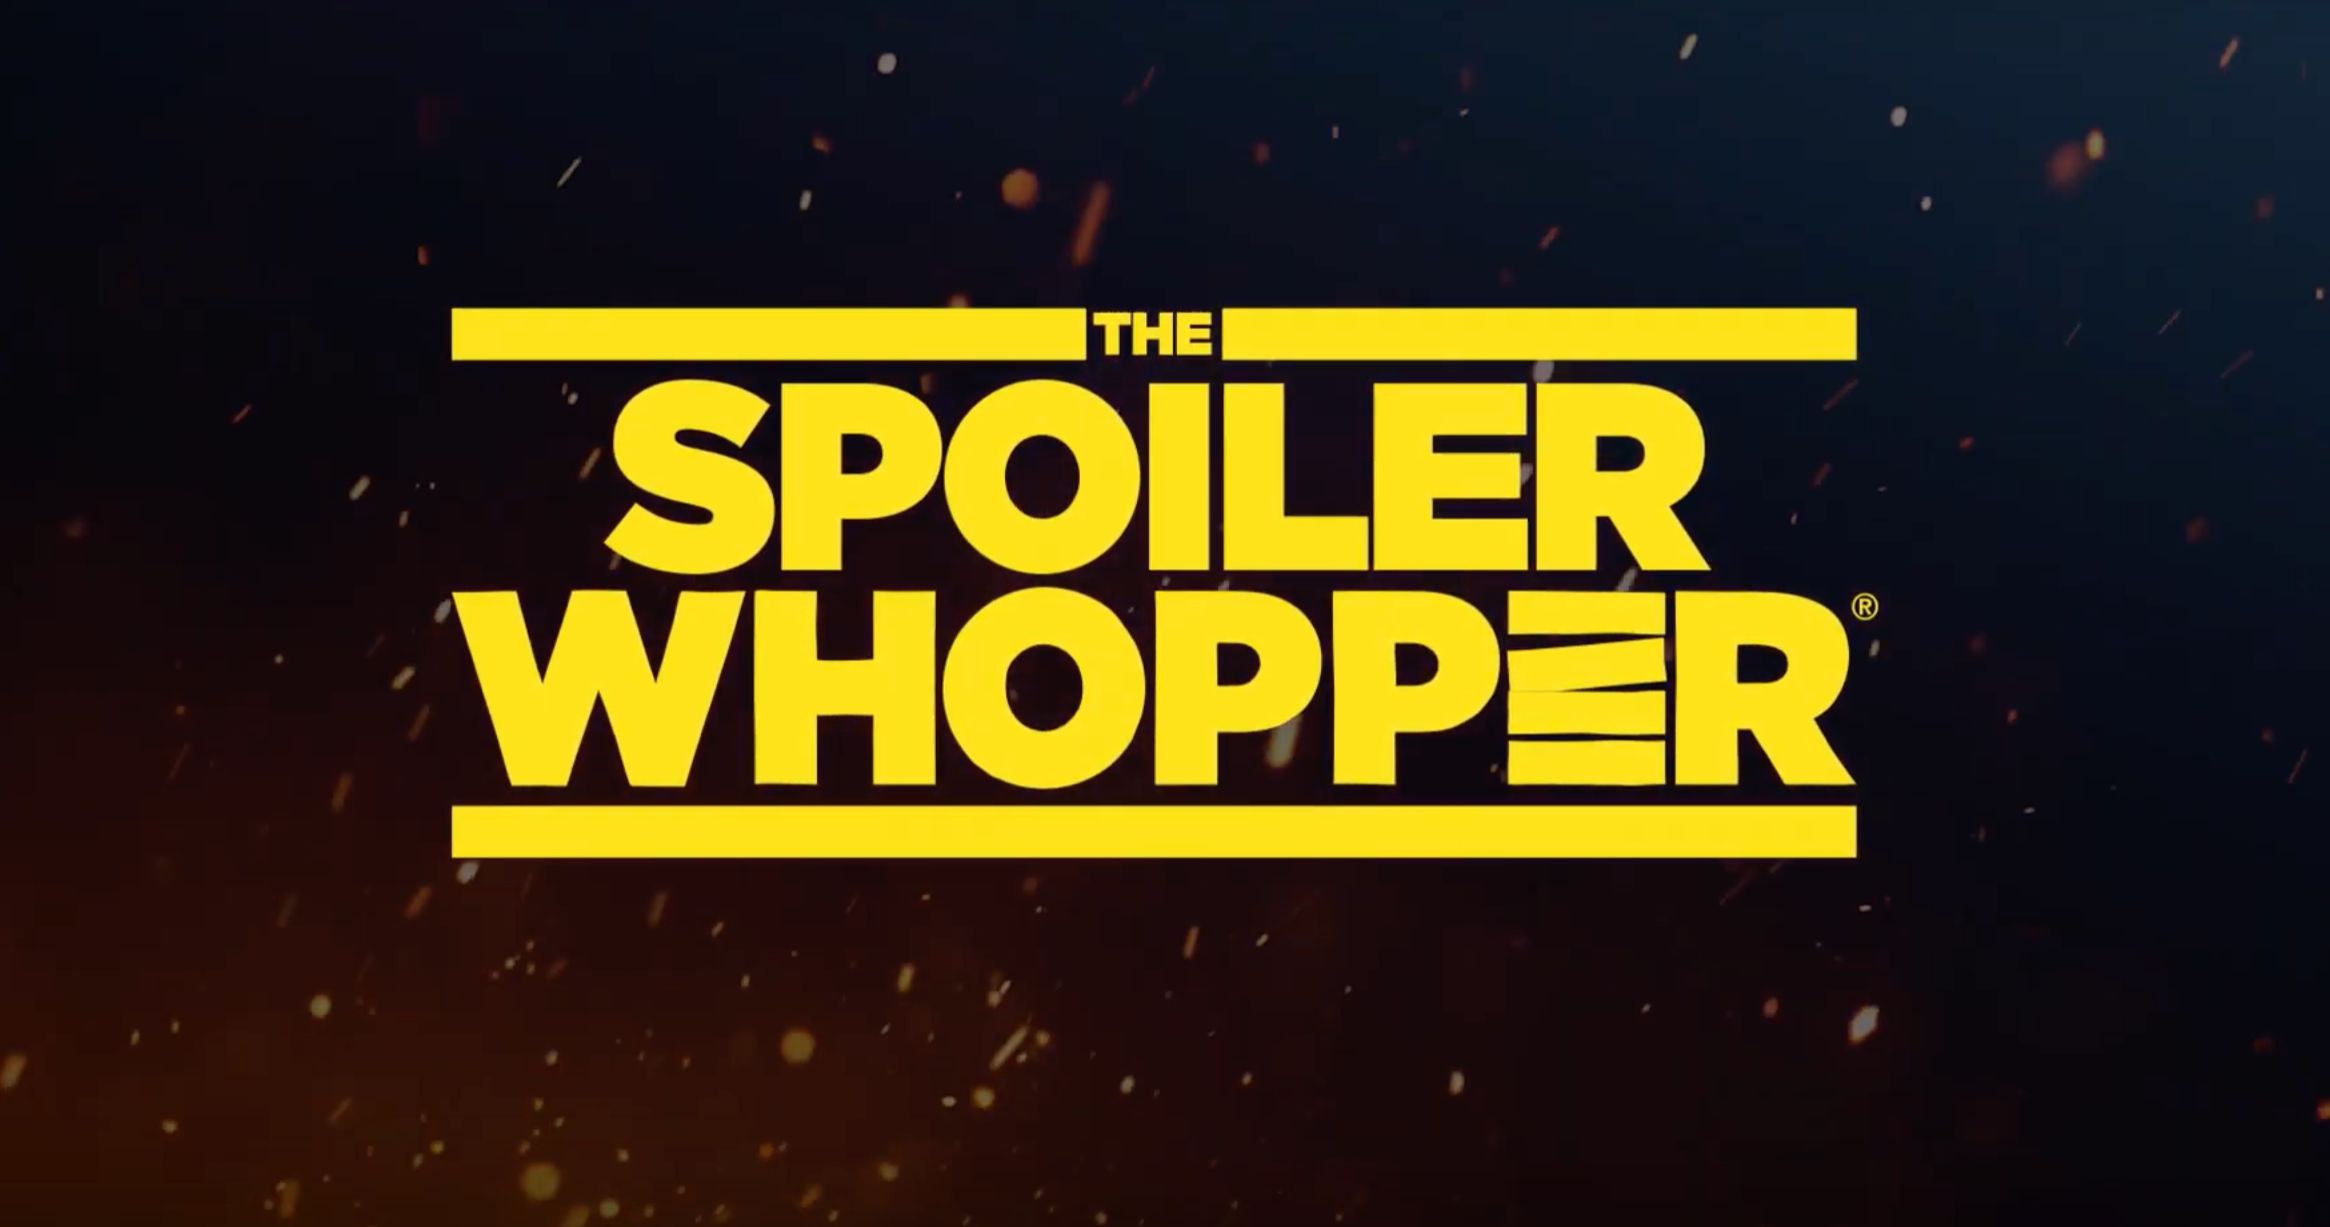 Endure Star Wars 9 Spoilers for a Free Whopper at Burger King in Germany